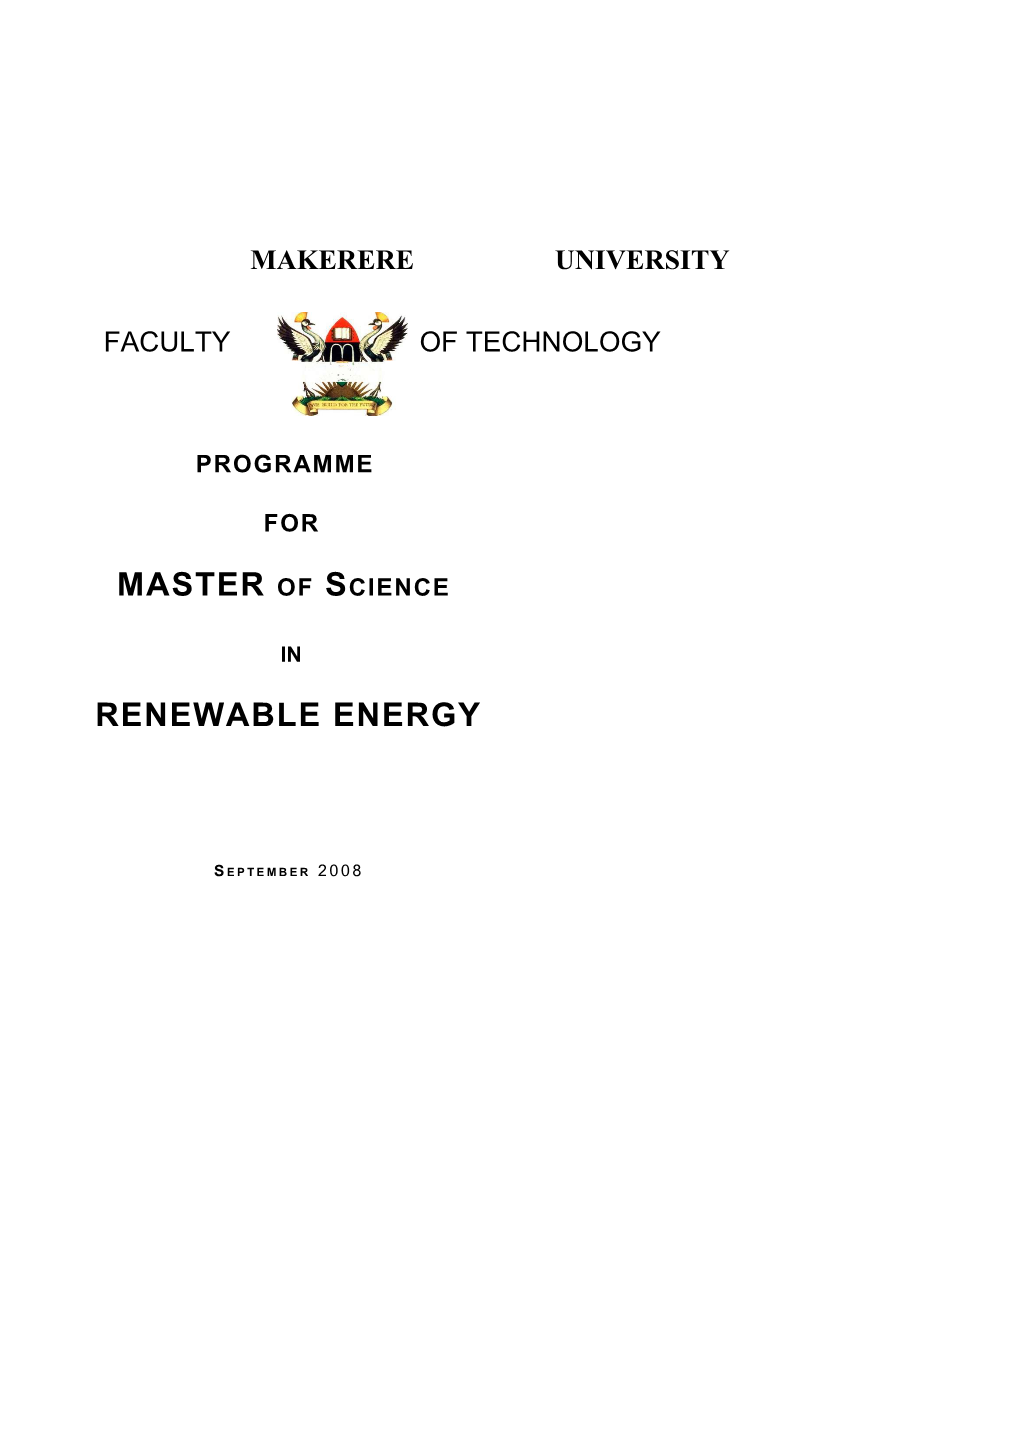 Msc in Renewable Energy Makerere Accredited Final Version